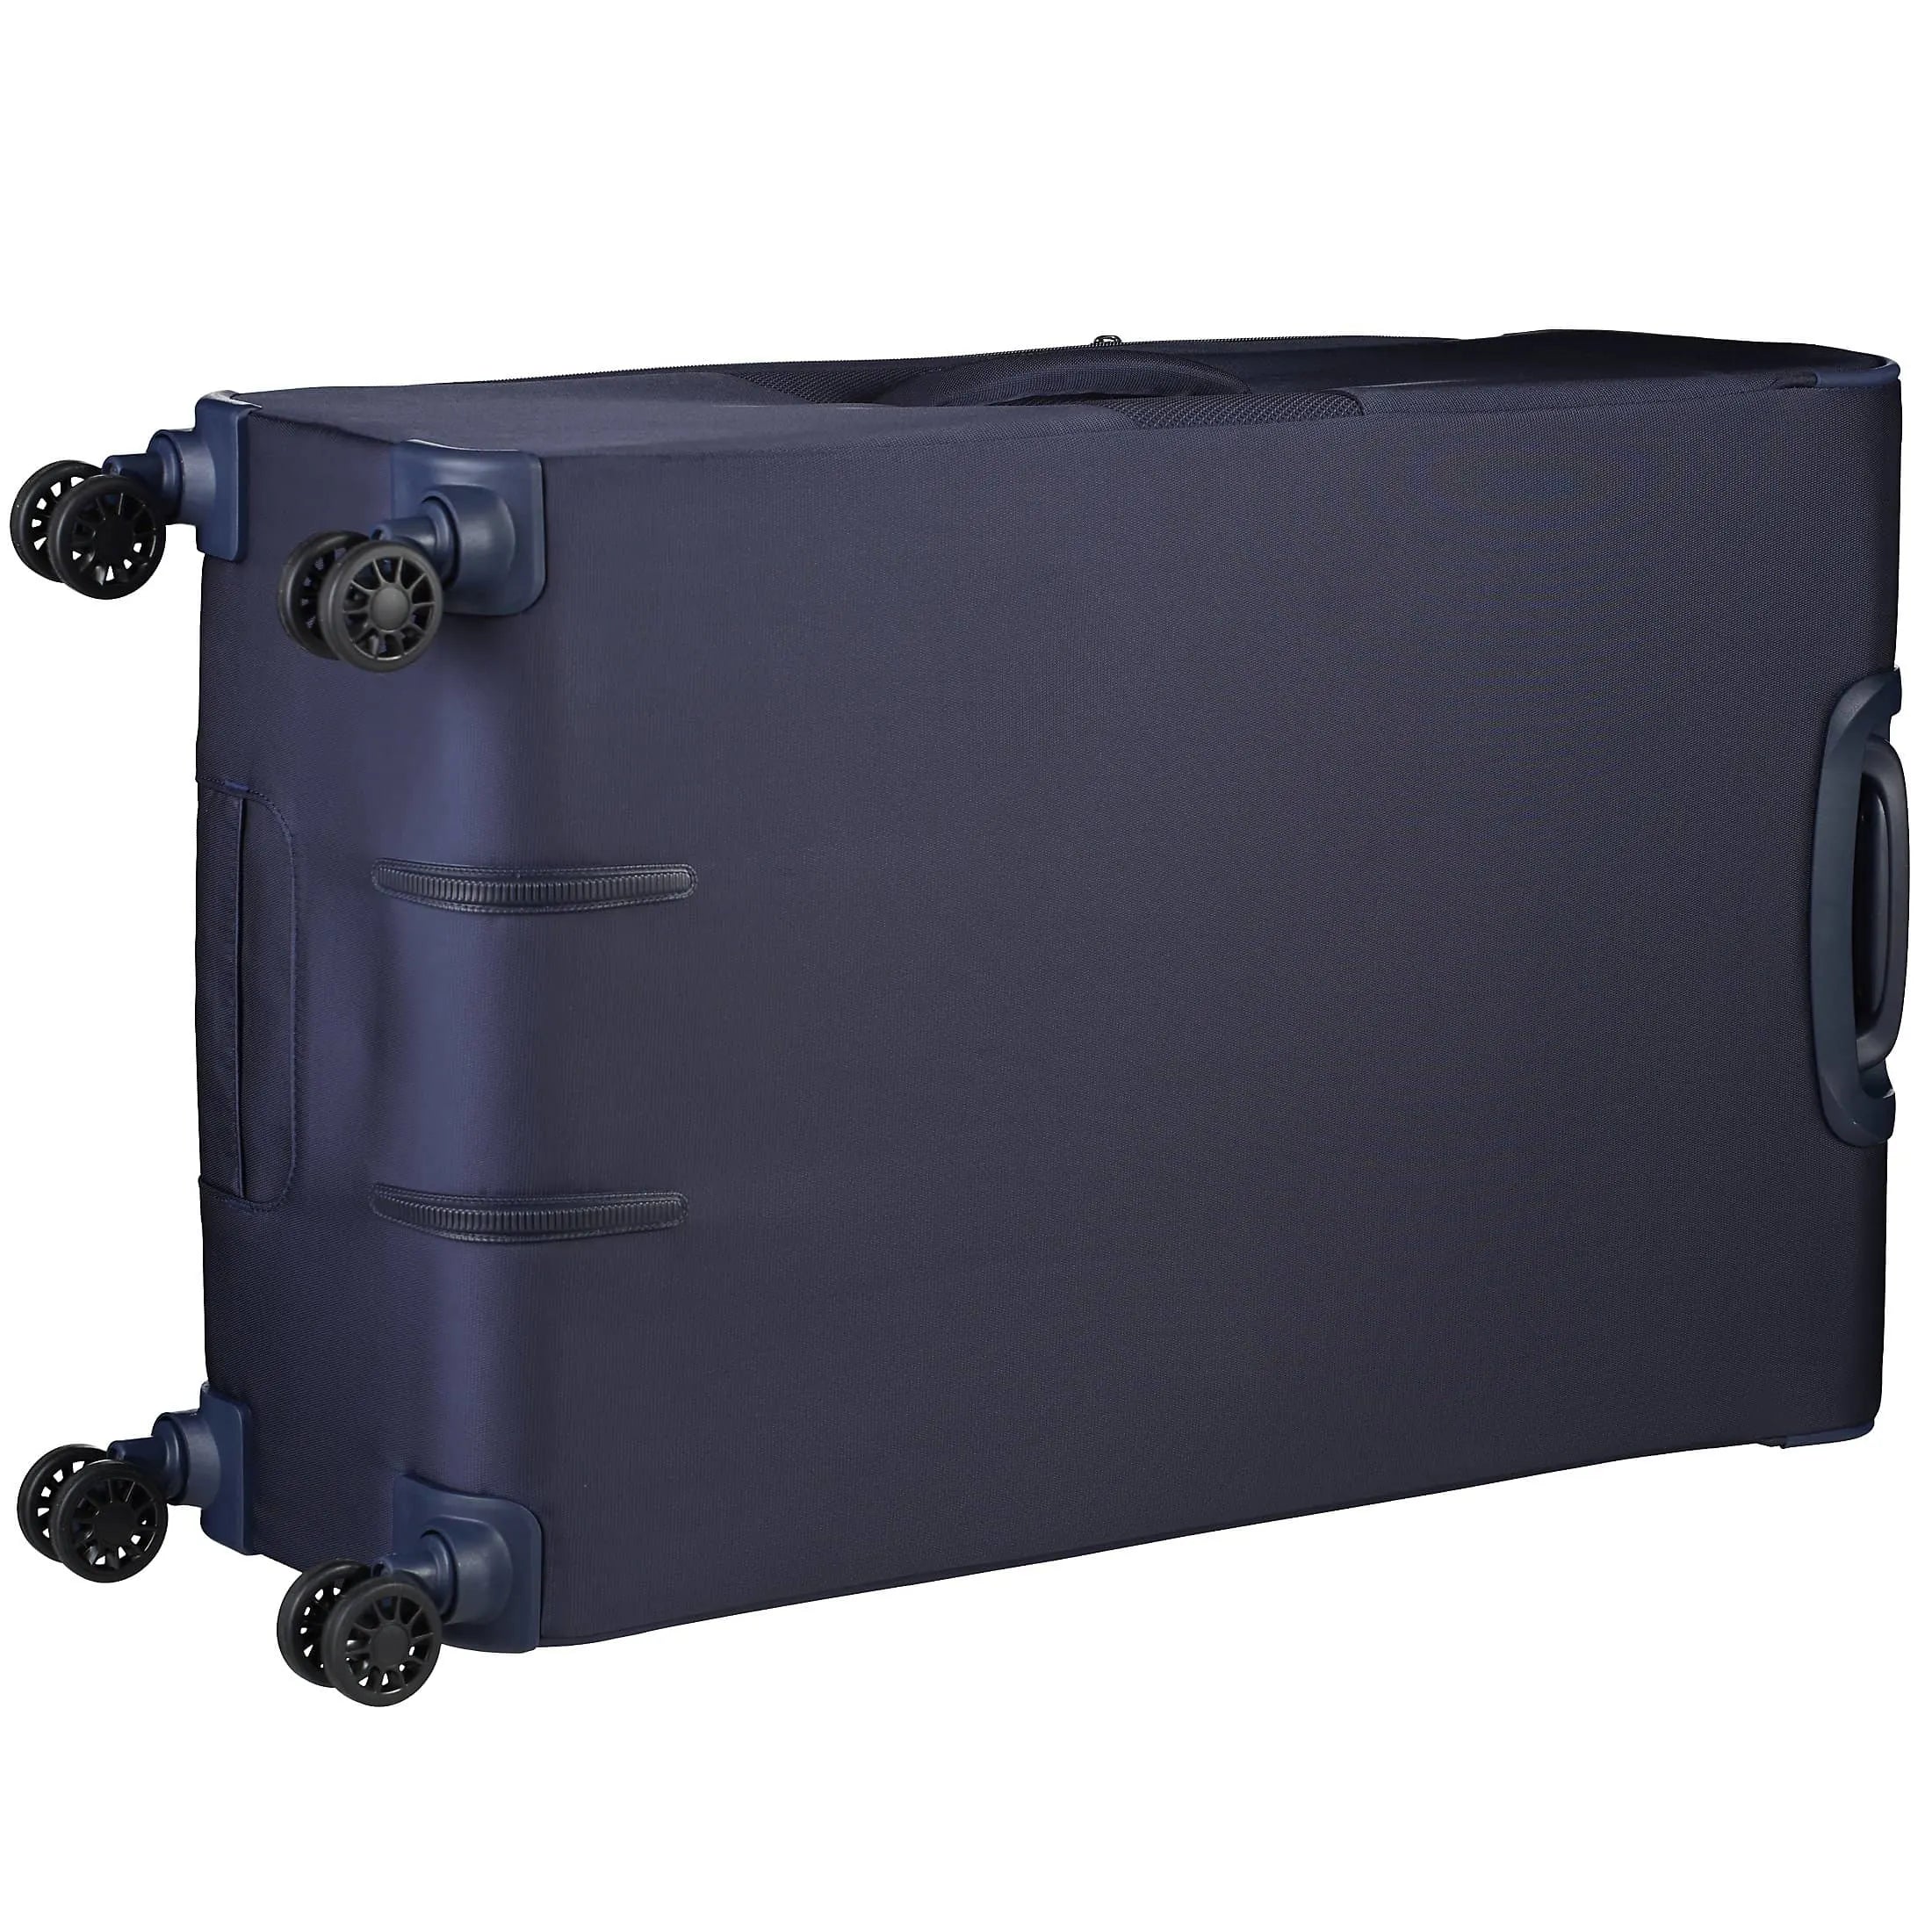 March 15 Trading Imperial 4-wheel trolley 78 cm - navy